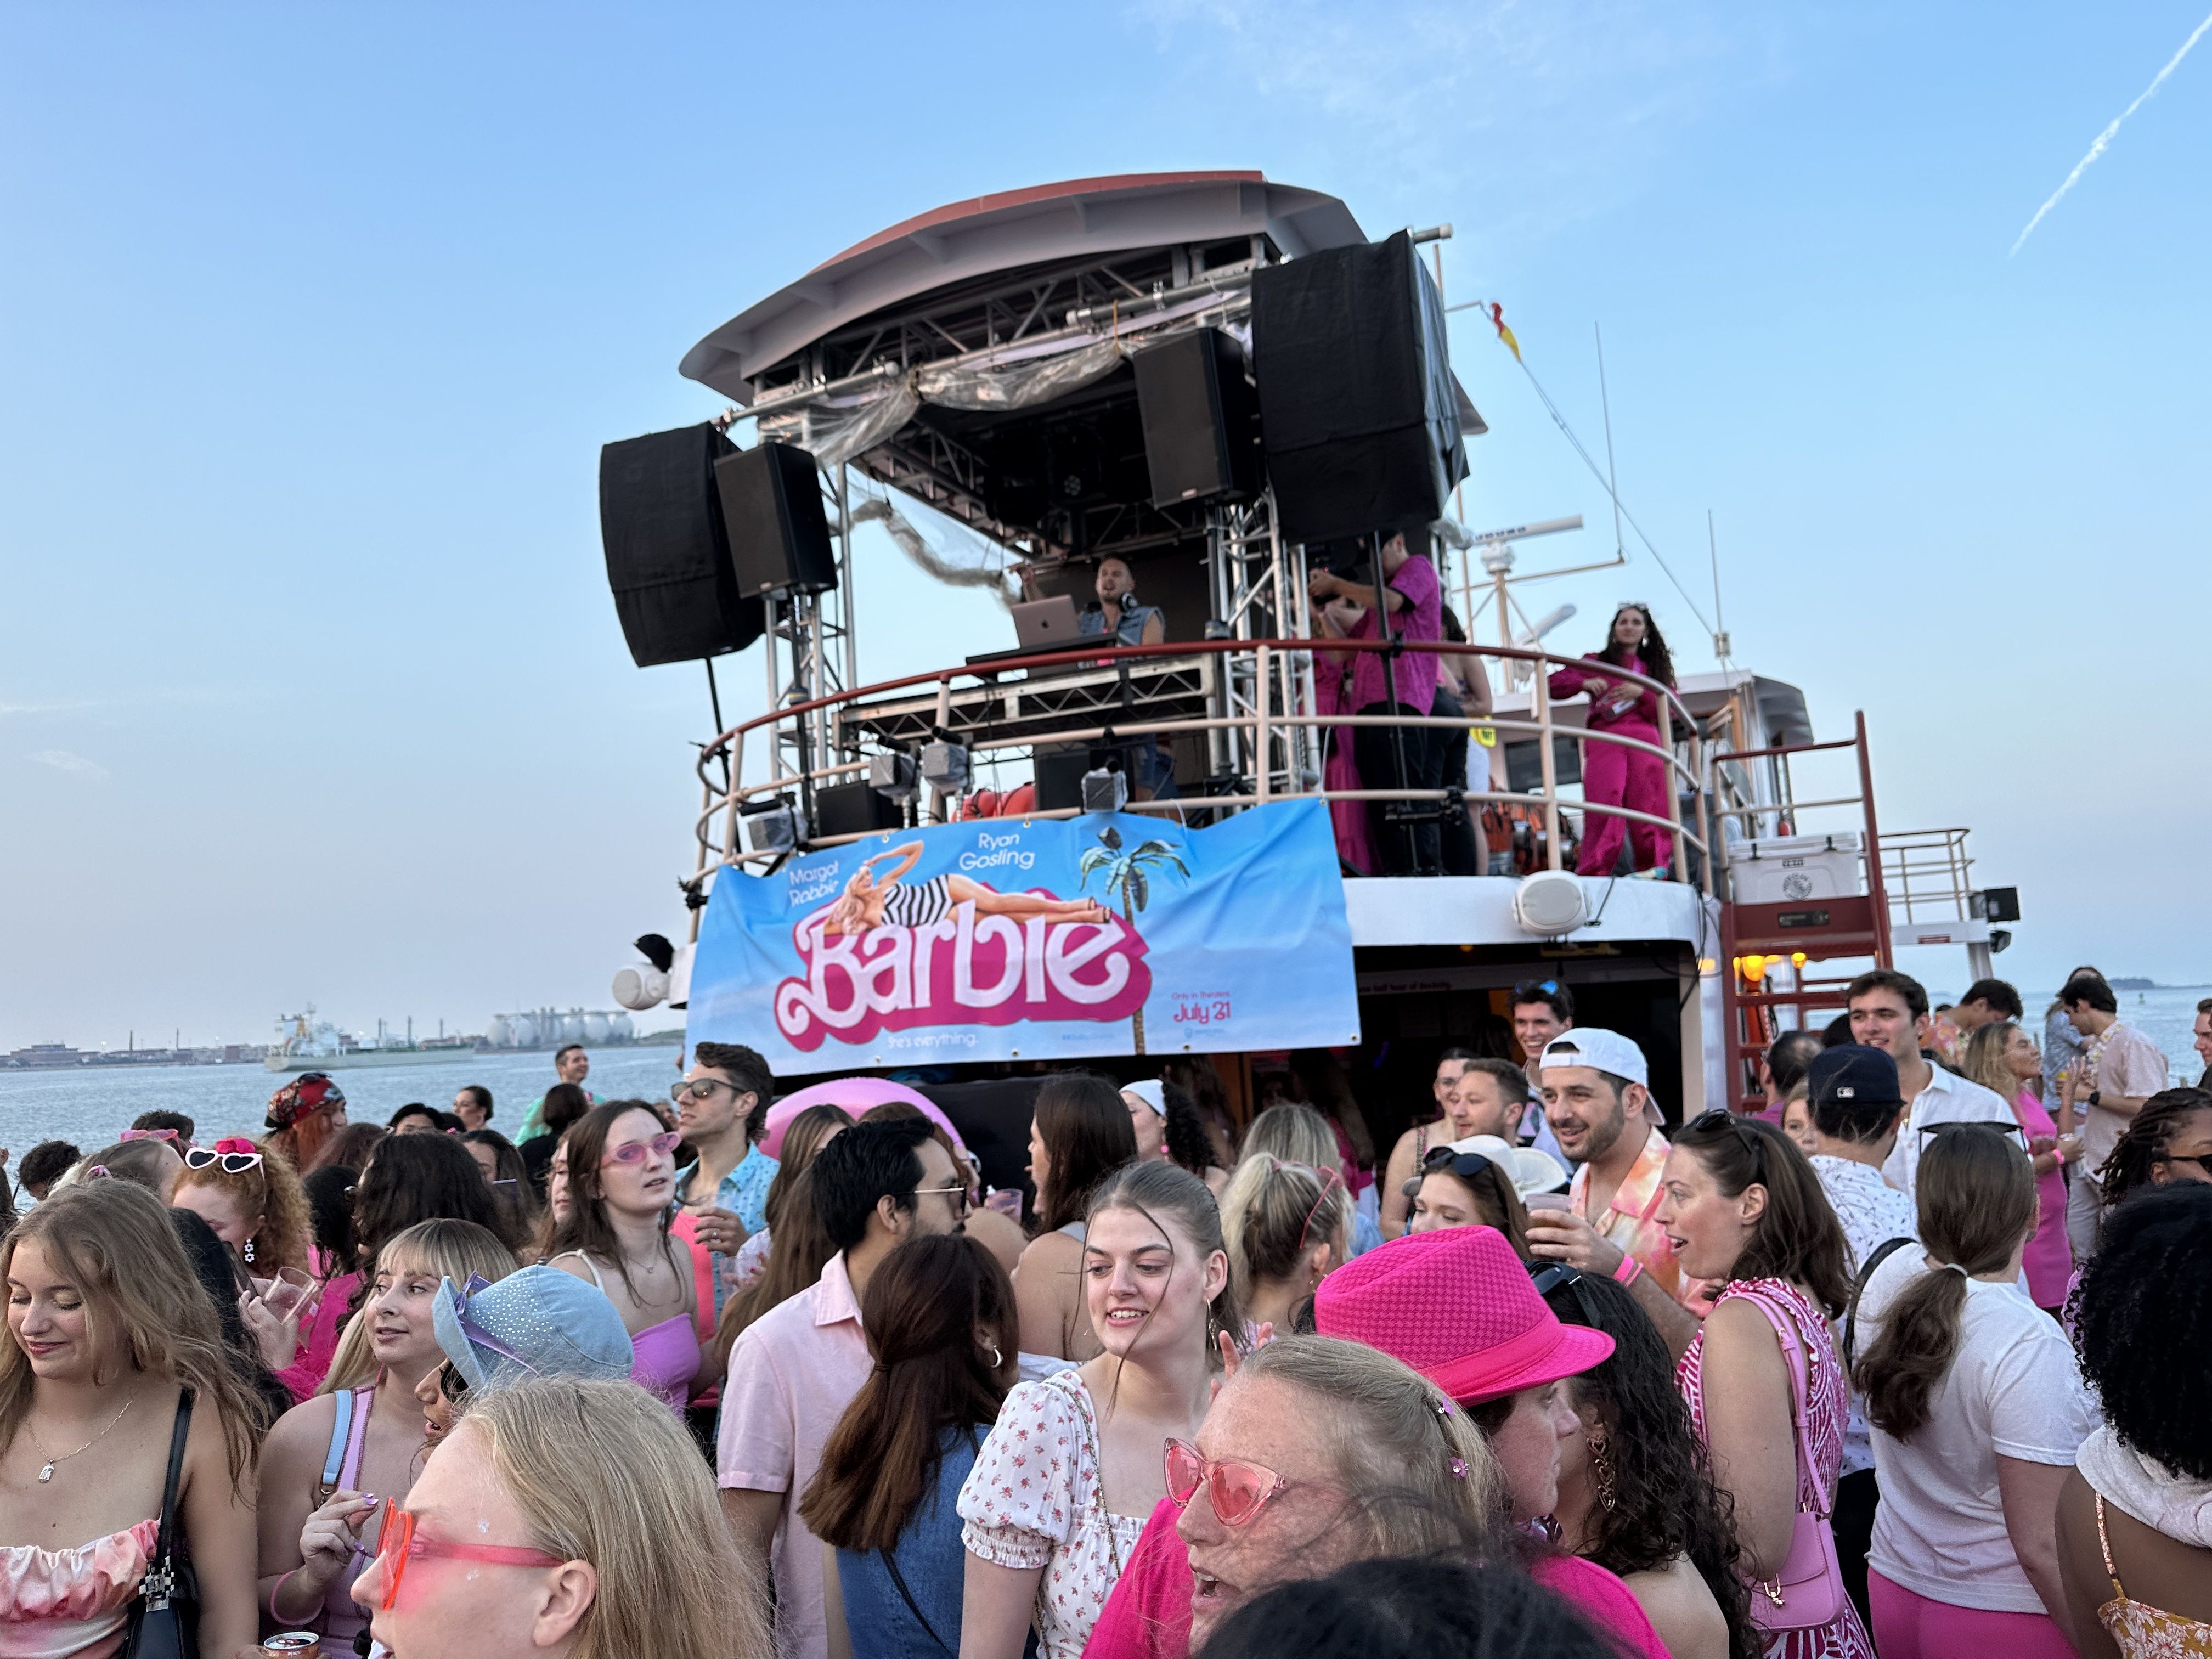 Hundreds dance and hang around the Barbie boat cruise Friday night. A DJ plays music, near a large Barbie banner.